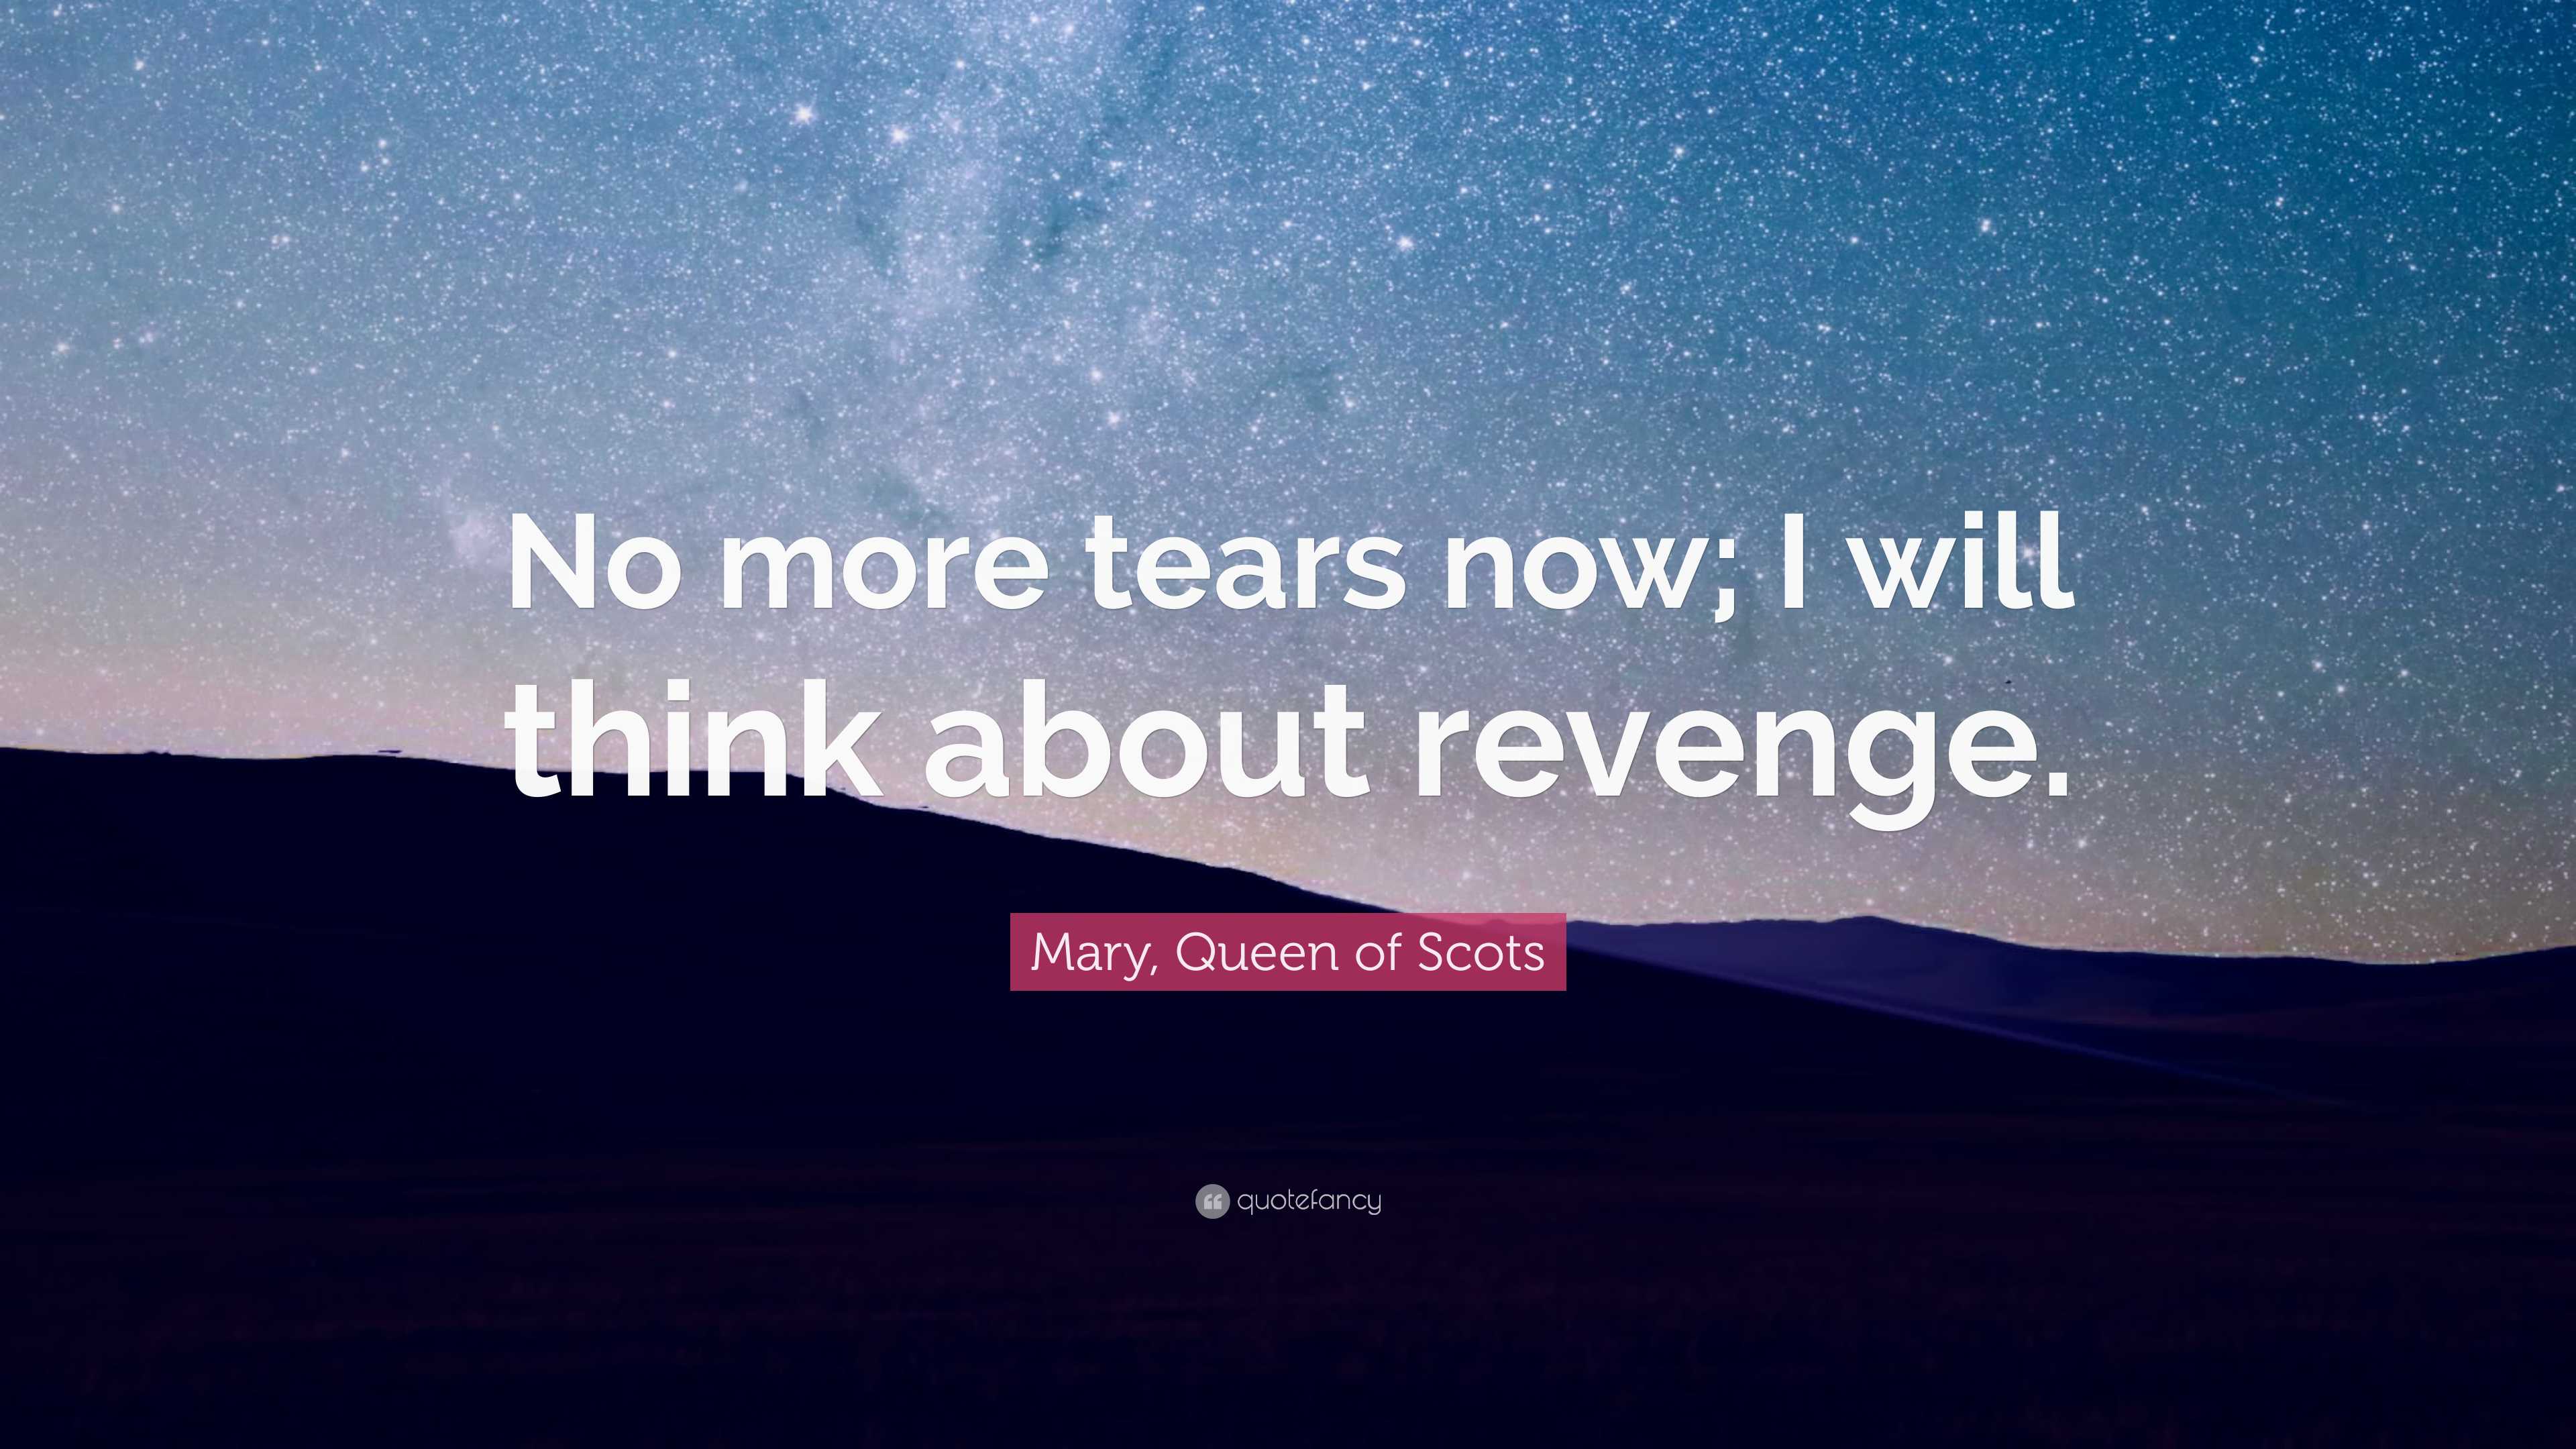 Quote: Queen now; Mary, will more “No about tears think I of Scots